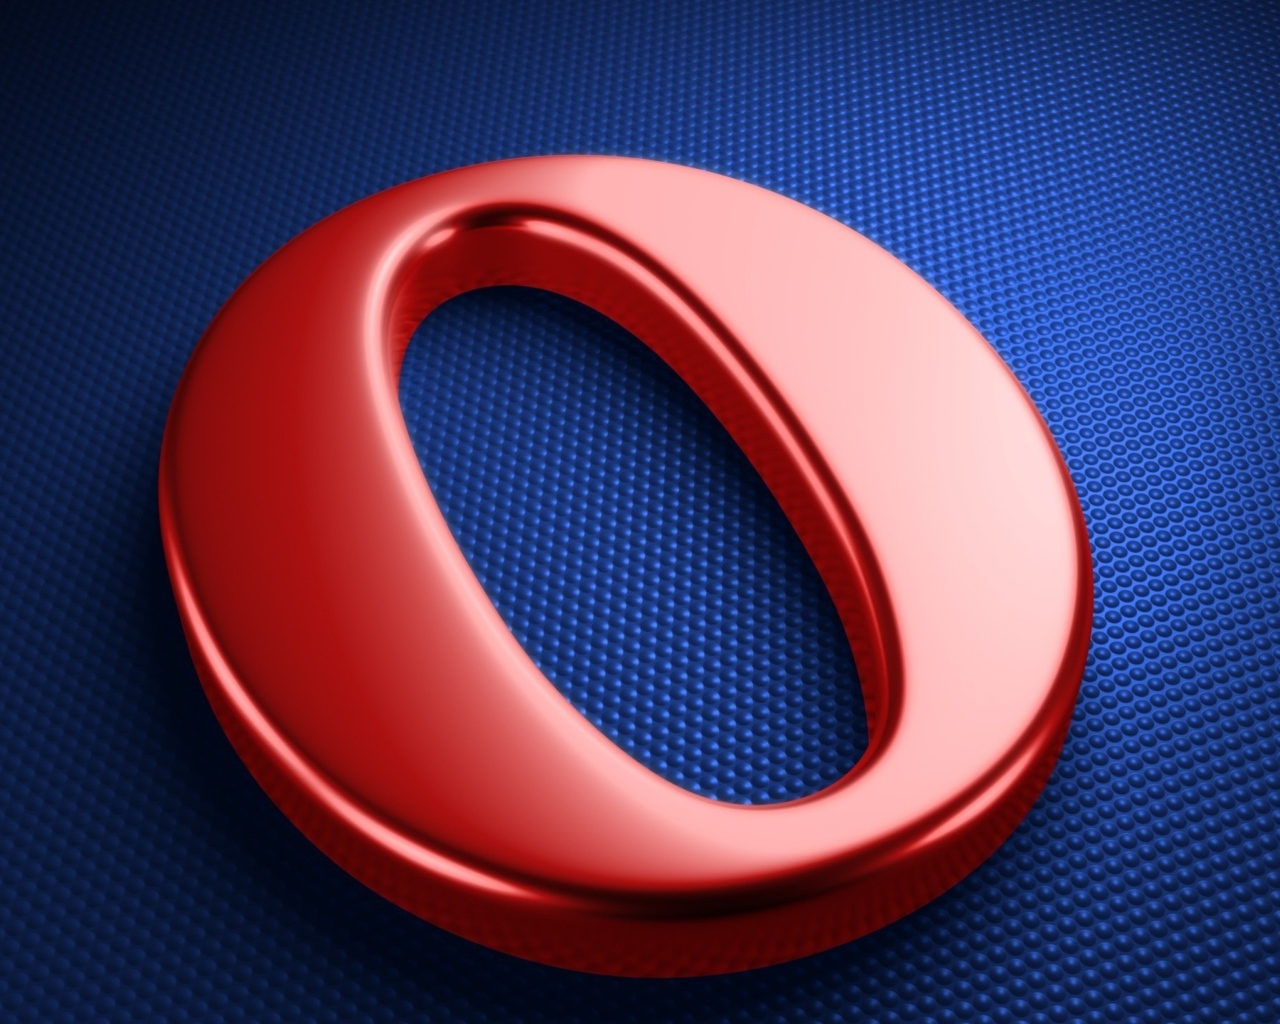 Red Opera browser logo on a blue background